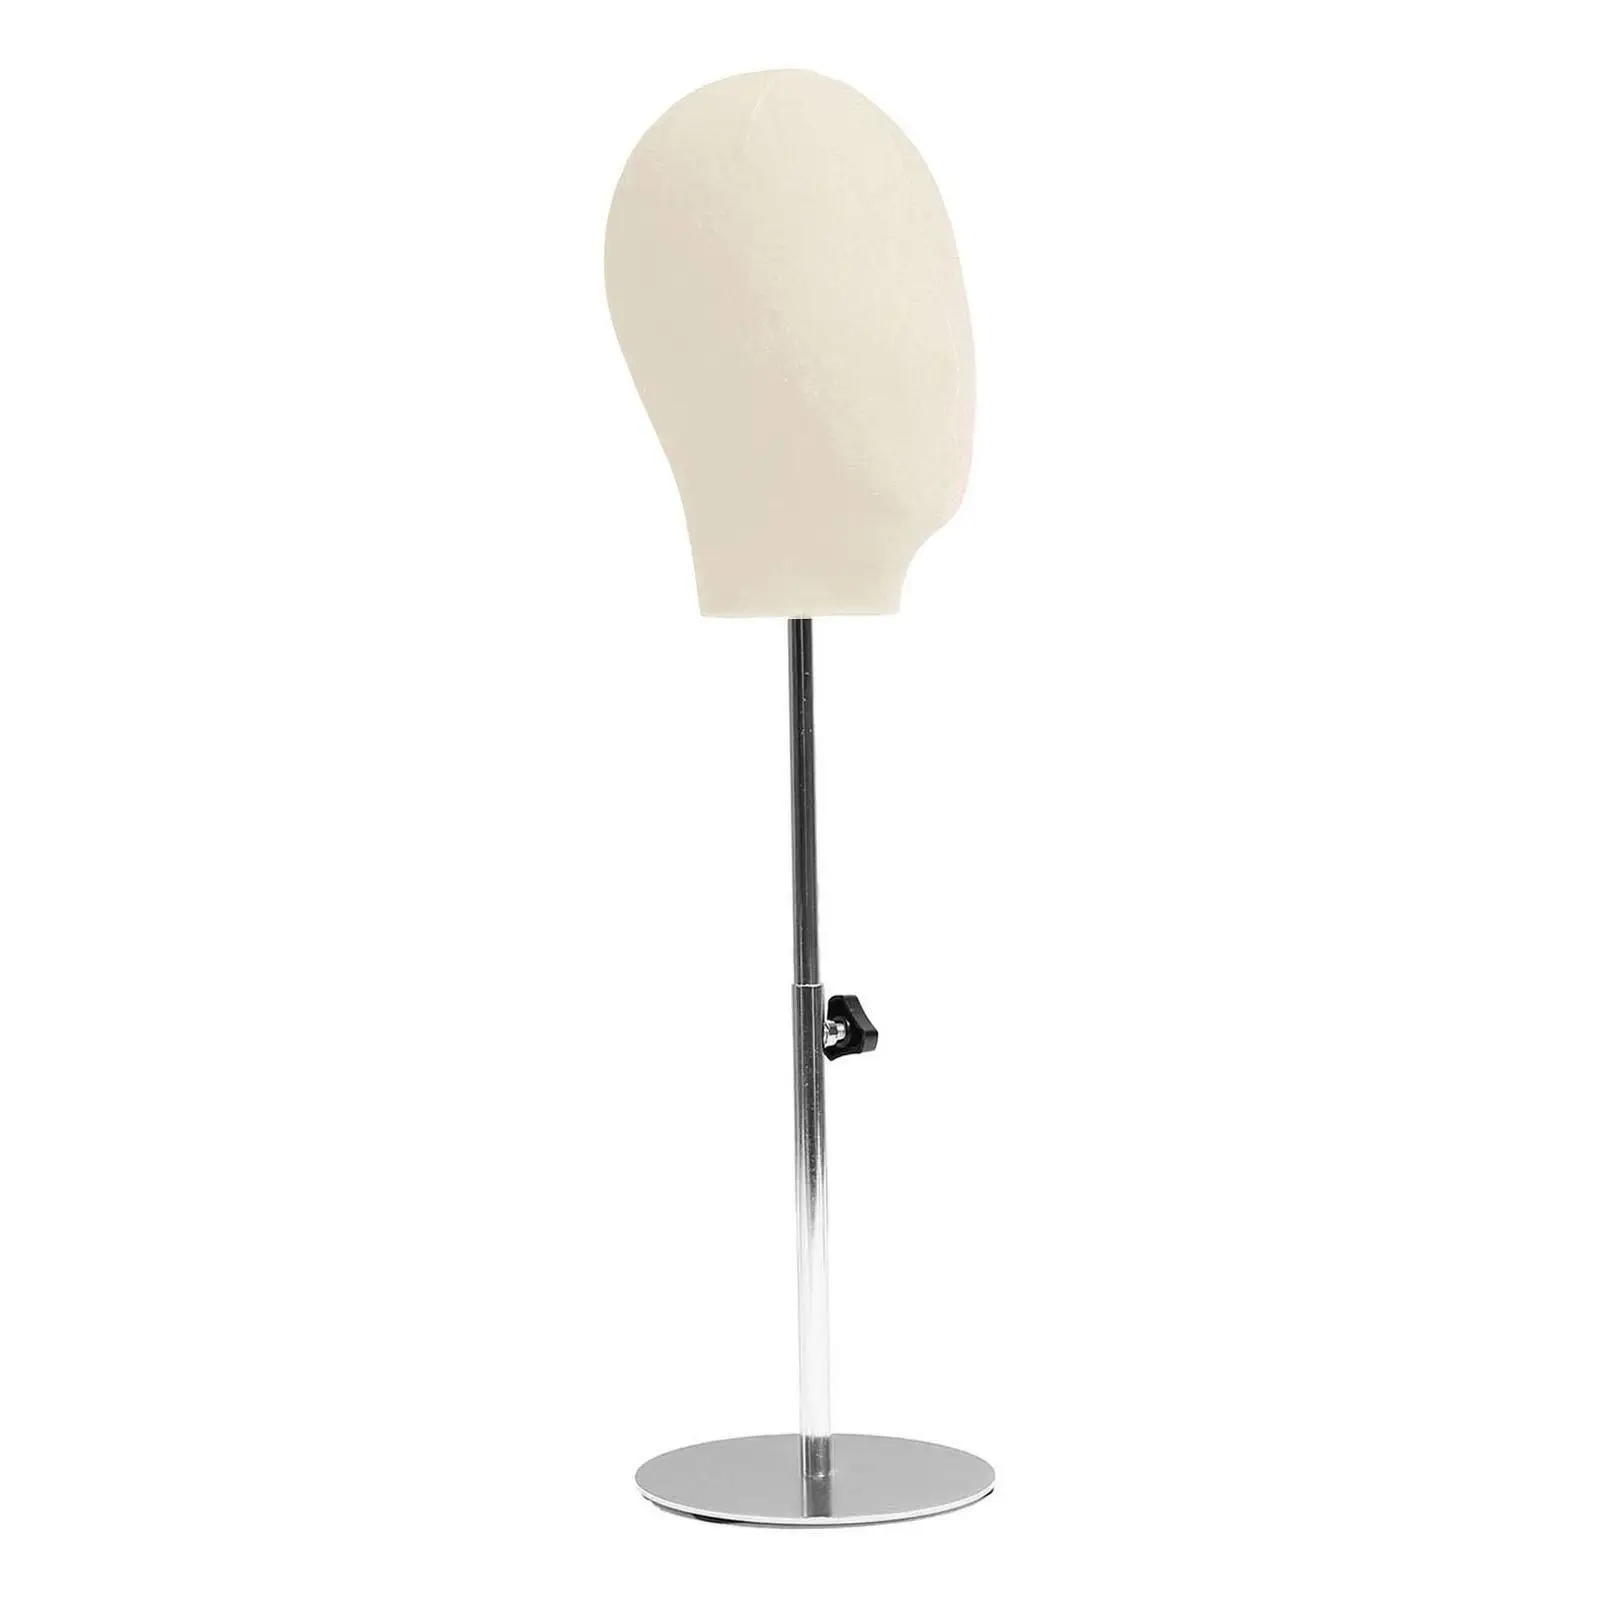 Hat Display Stand Manikin Head Height Adjustable Portable for Styling Hats Display